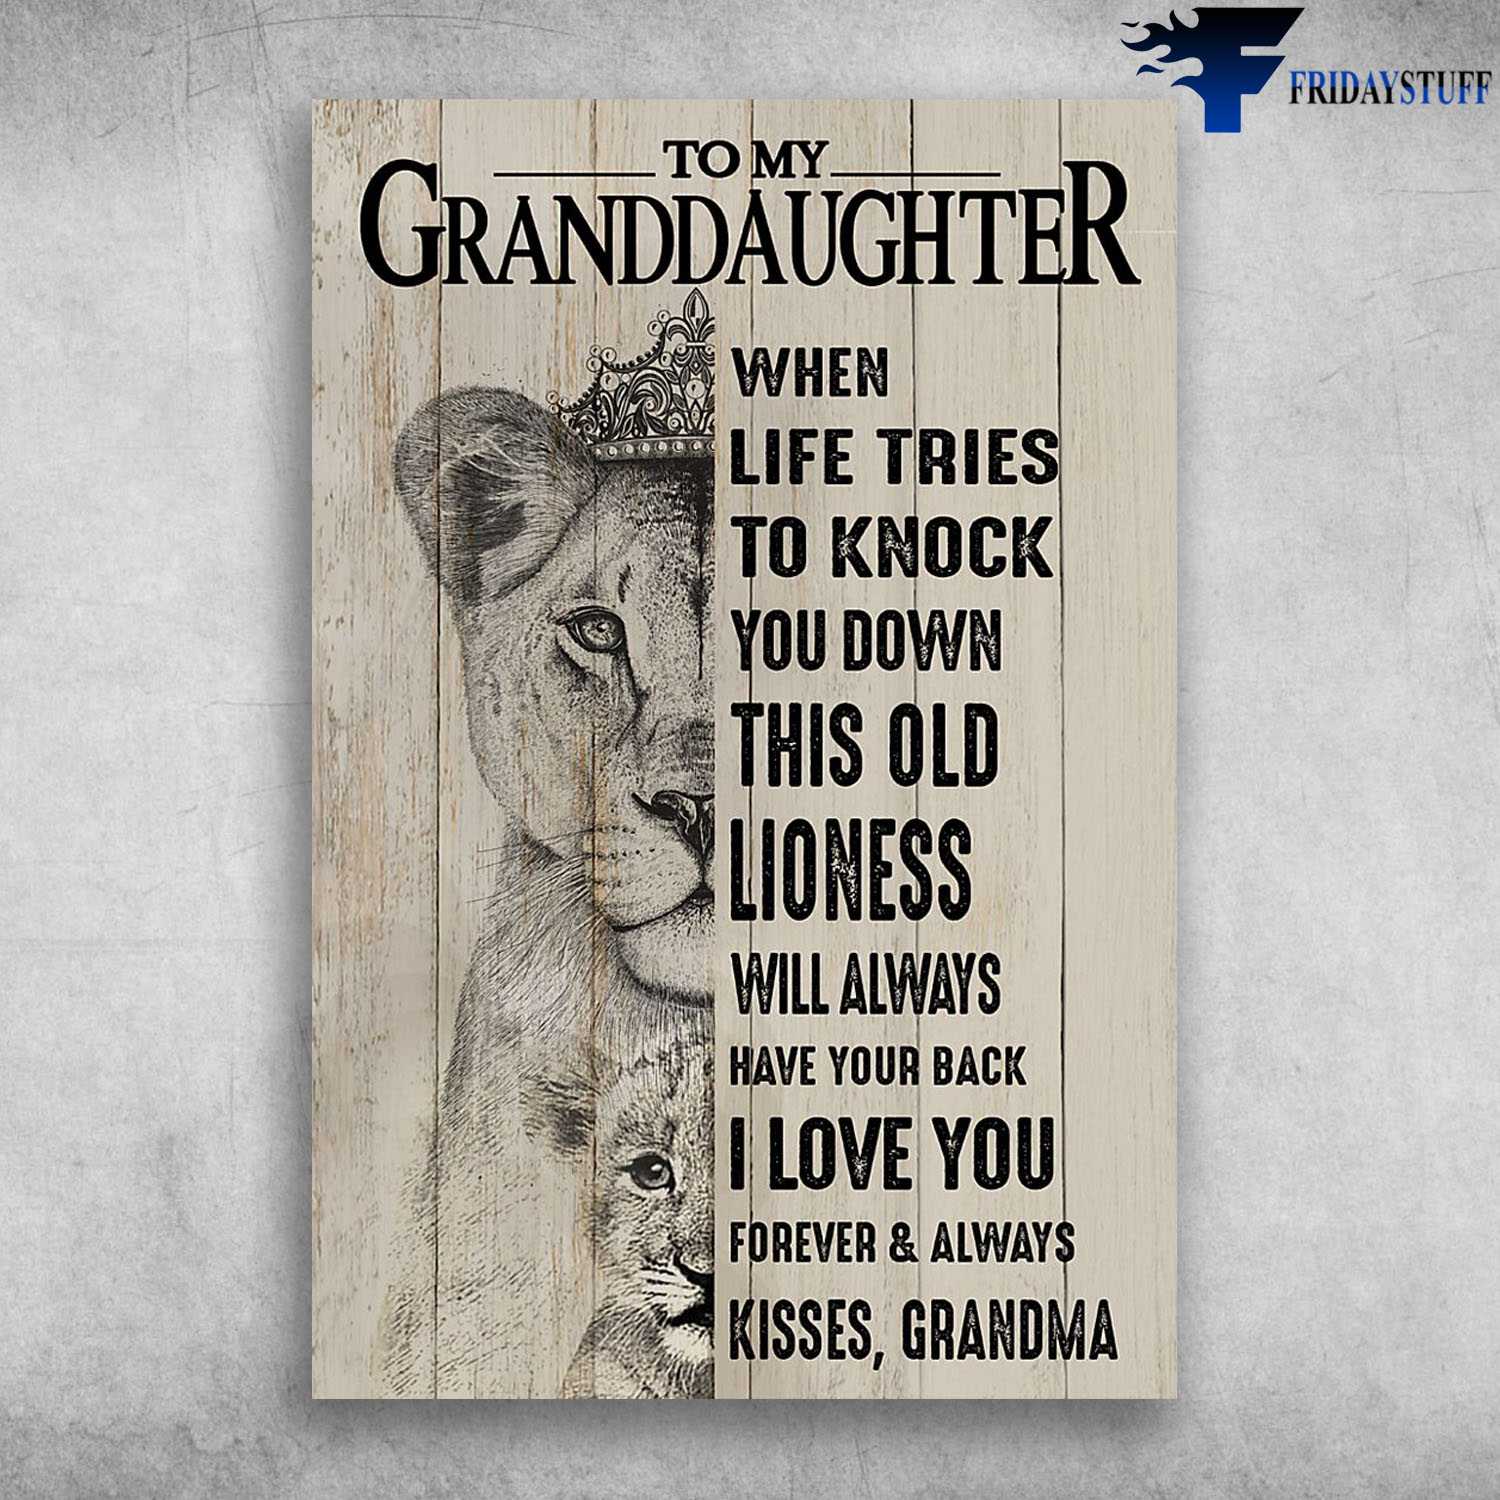 To My Granddaughter This Old Lioness Will Always Have Your Back Kisses Grandma